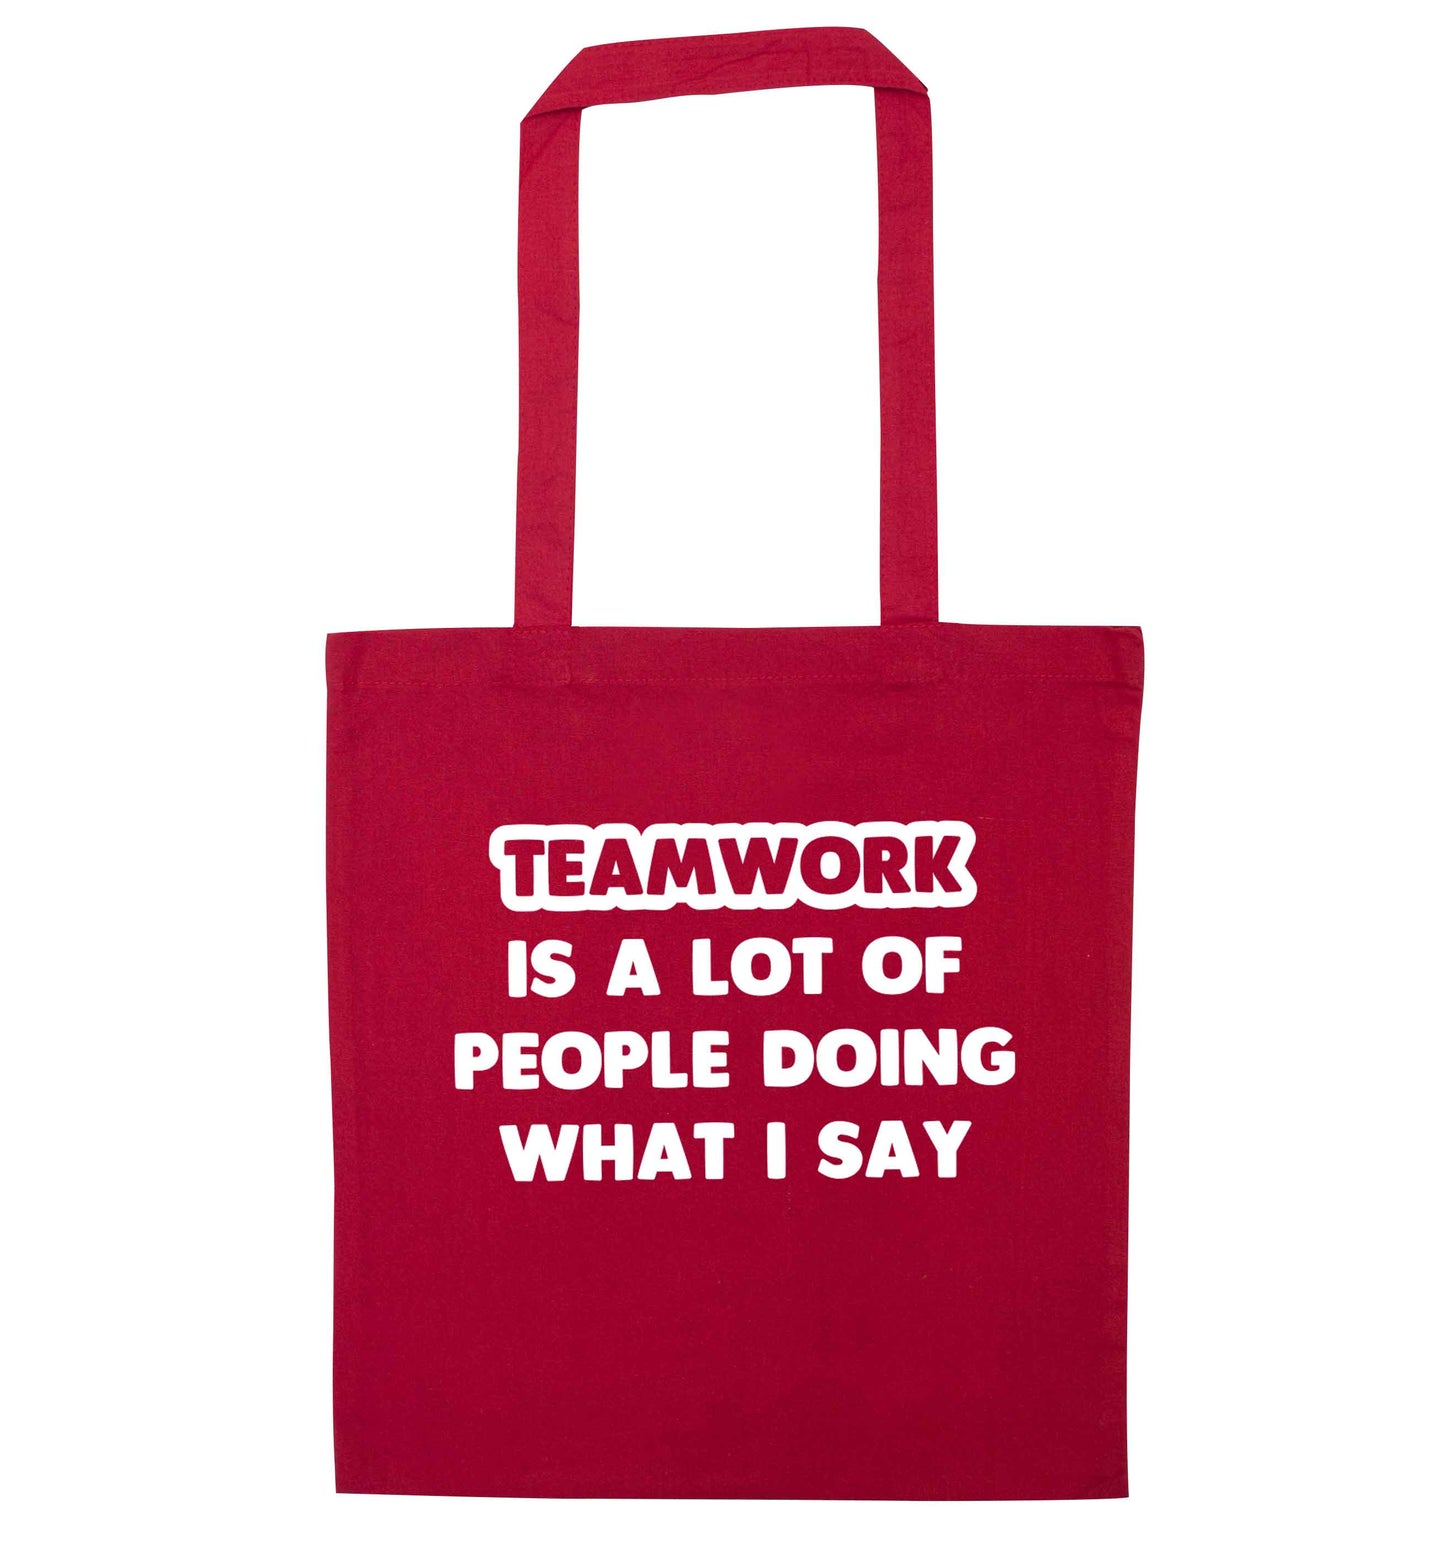 Teamwork is a lot of people doing what I say red tote bag